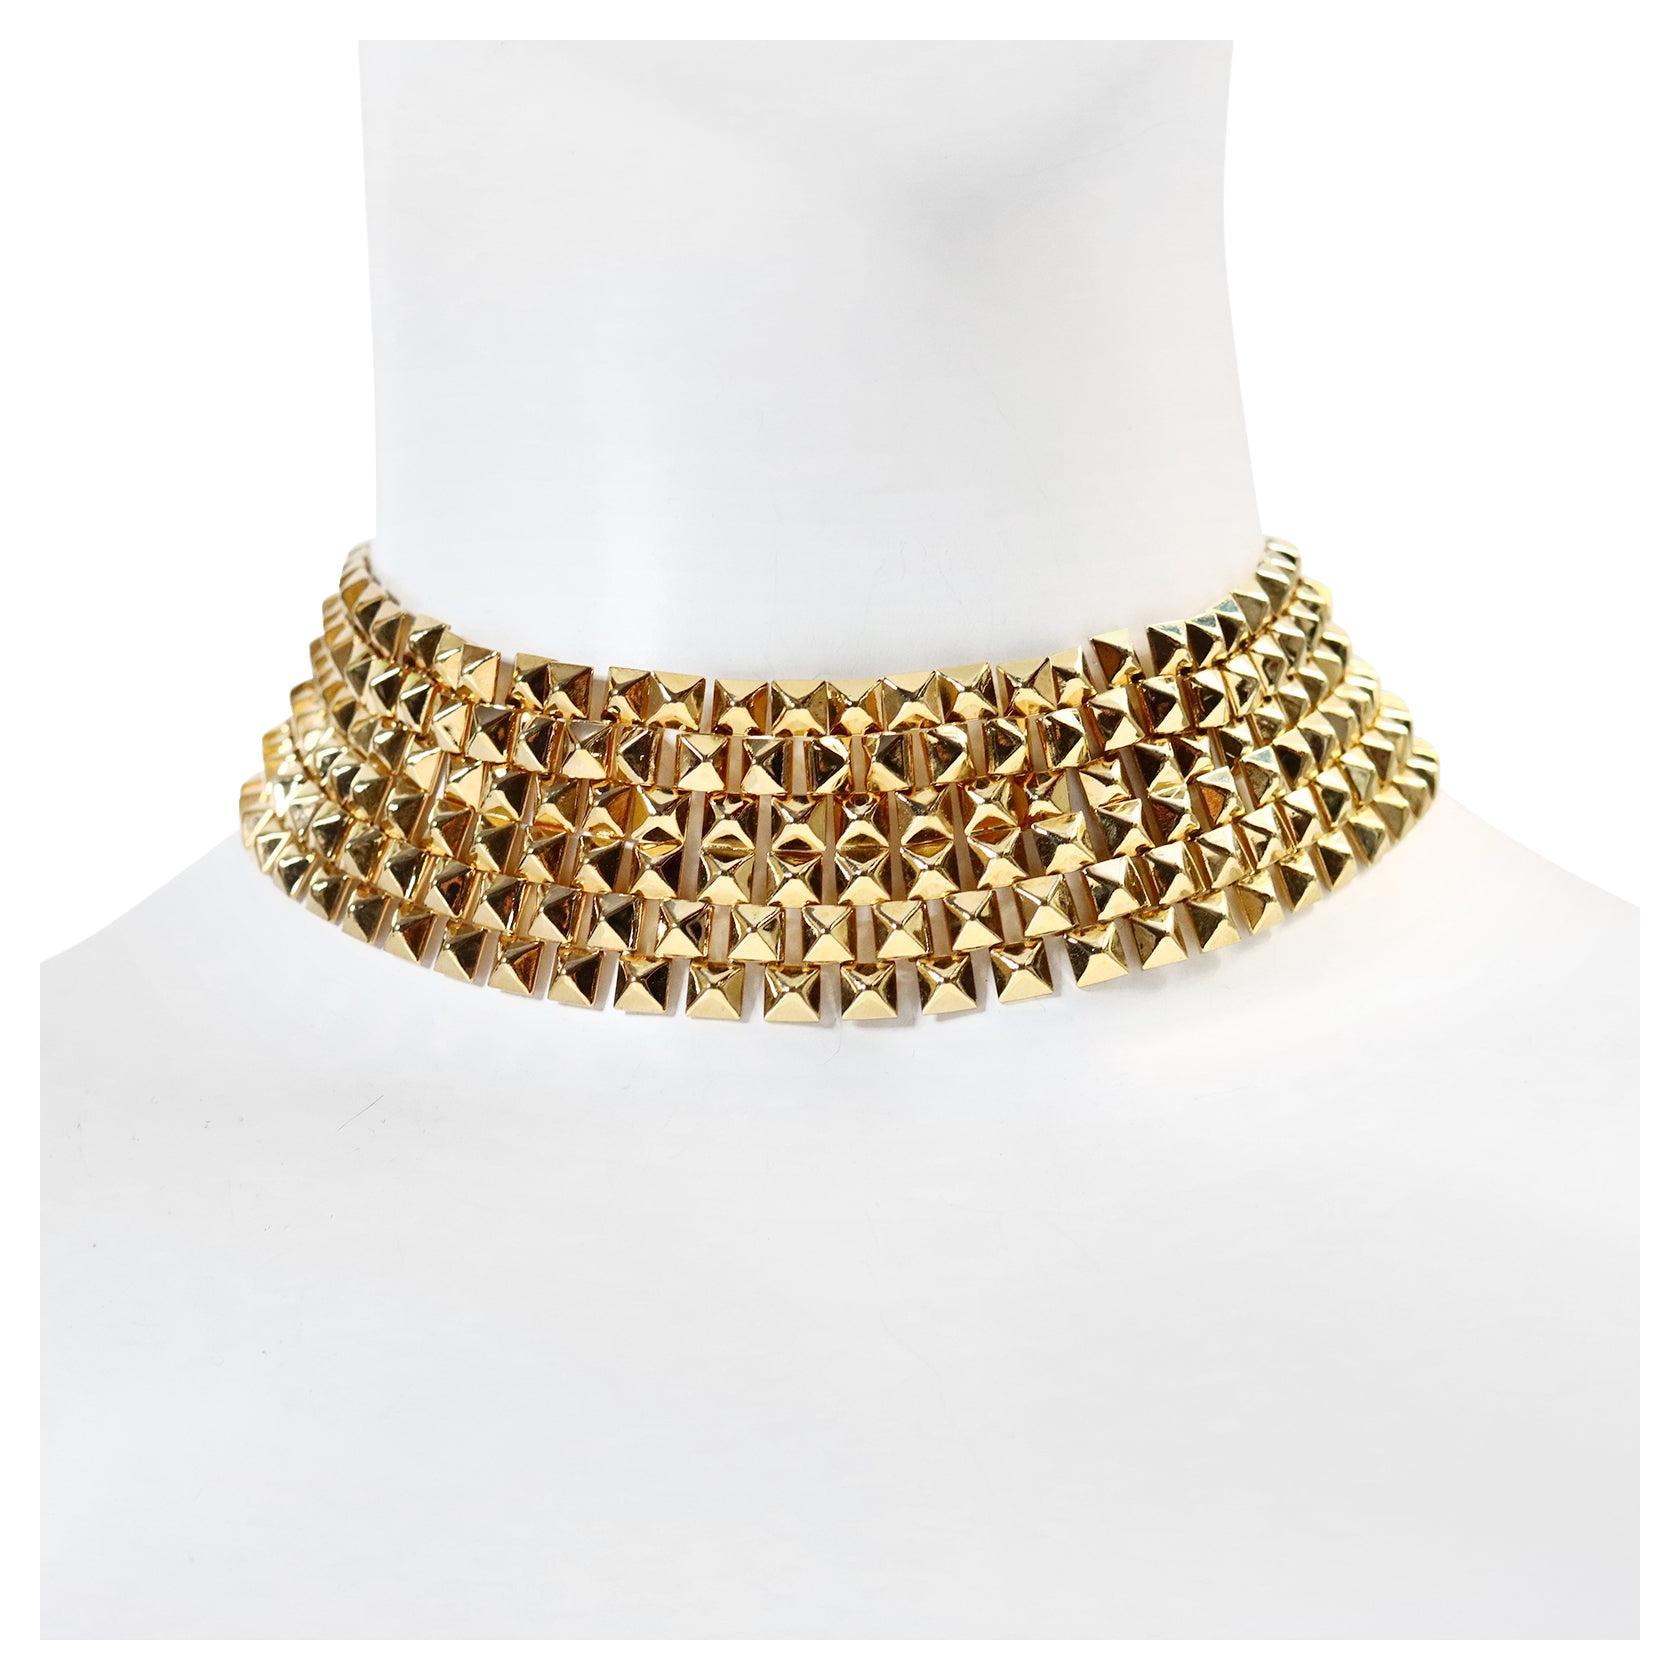 Vintage Vendome Gold Tone Wide Choker Necklace Circa 1980s.  Has 6 rows of studs just like the same motif that the designer Valentino is now using for their stud. This is such a great find. 12.5